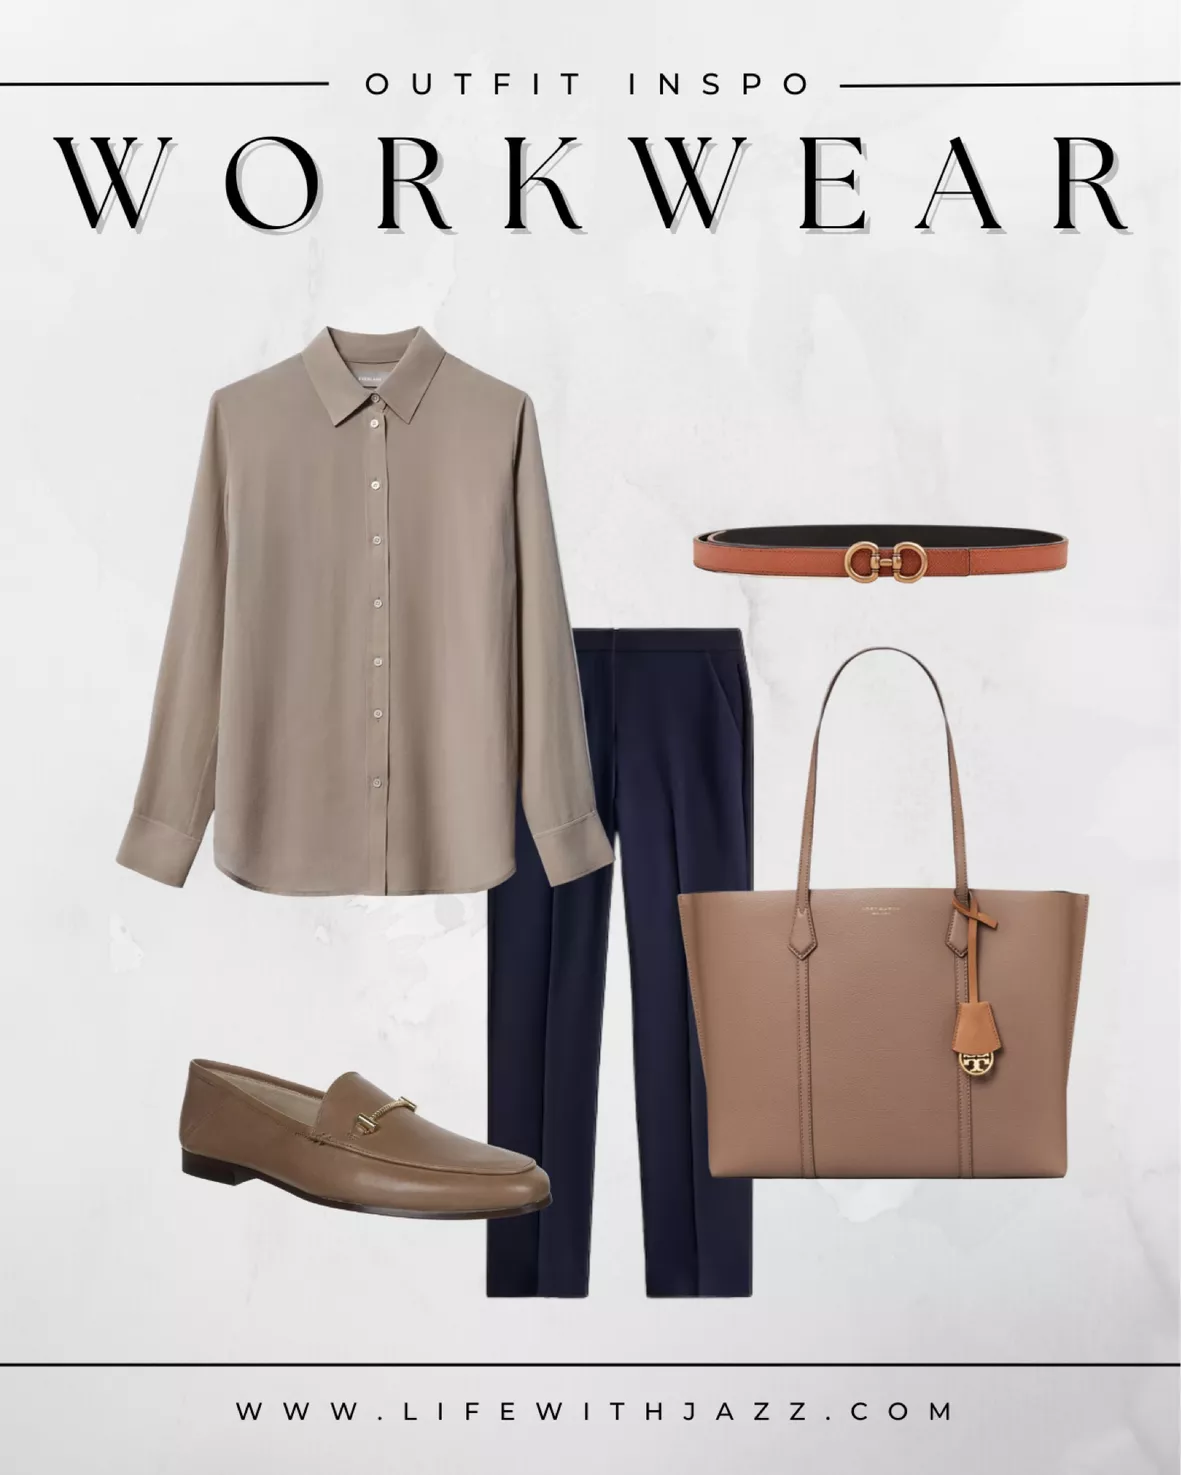 Business Casual Workwear Capsule + 20 Outfit Ideas - LIFE WITH JAZZ